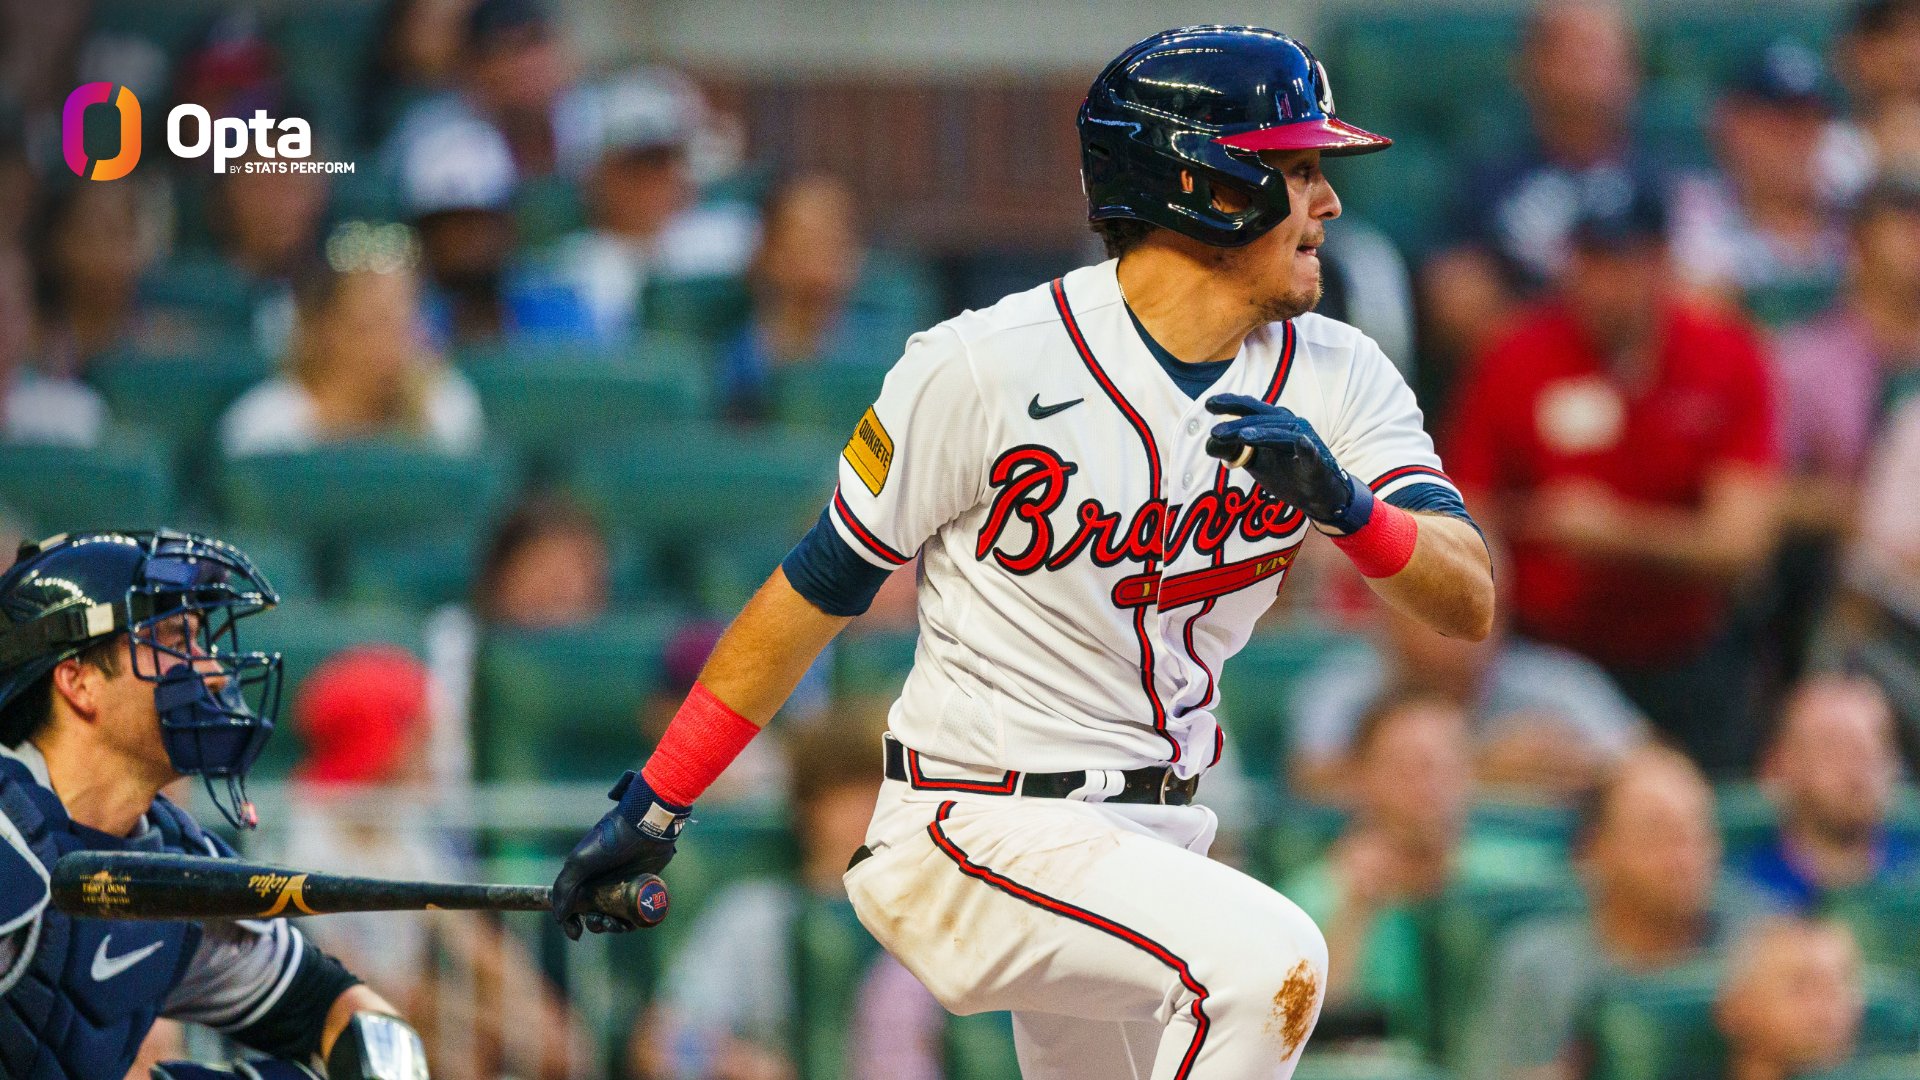 OptaSTATS on X: The @Braves' Nicky Lopez is the 1st player to